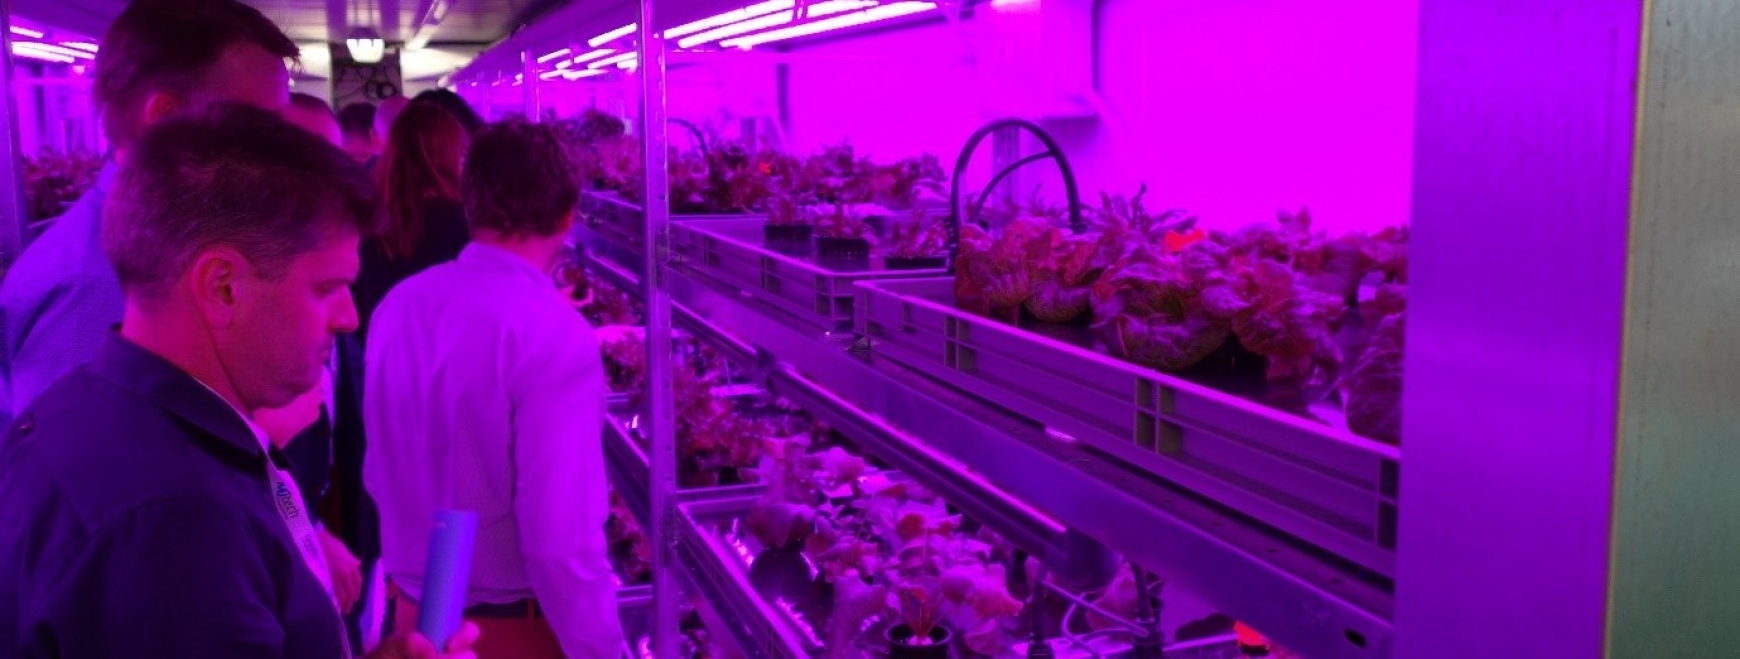 People looking at an example of vertical farming